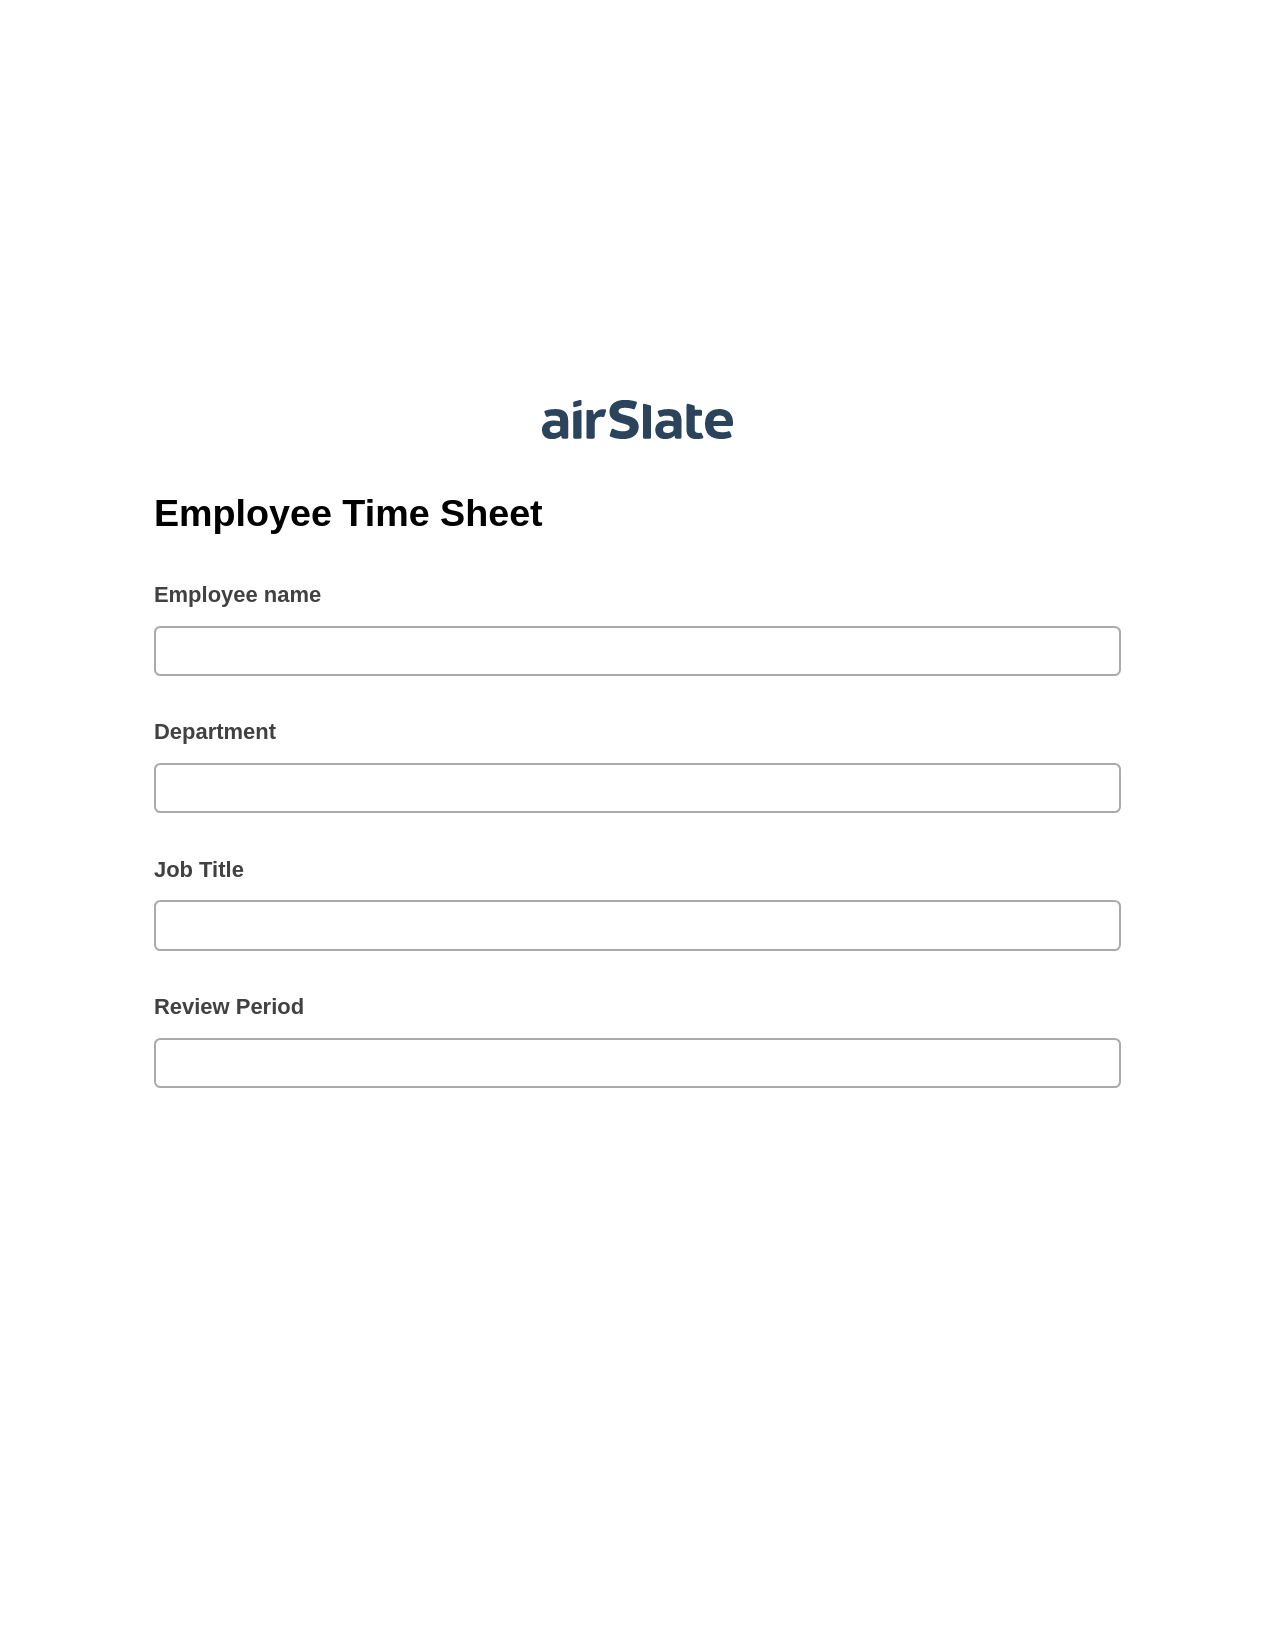 Multirole Employee Time Sheet Pre-fill from MS Dynamics 365 Records, Google Cloud Print Bot, Archive to Google Drive Bot